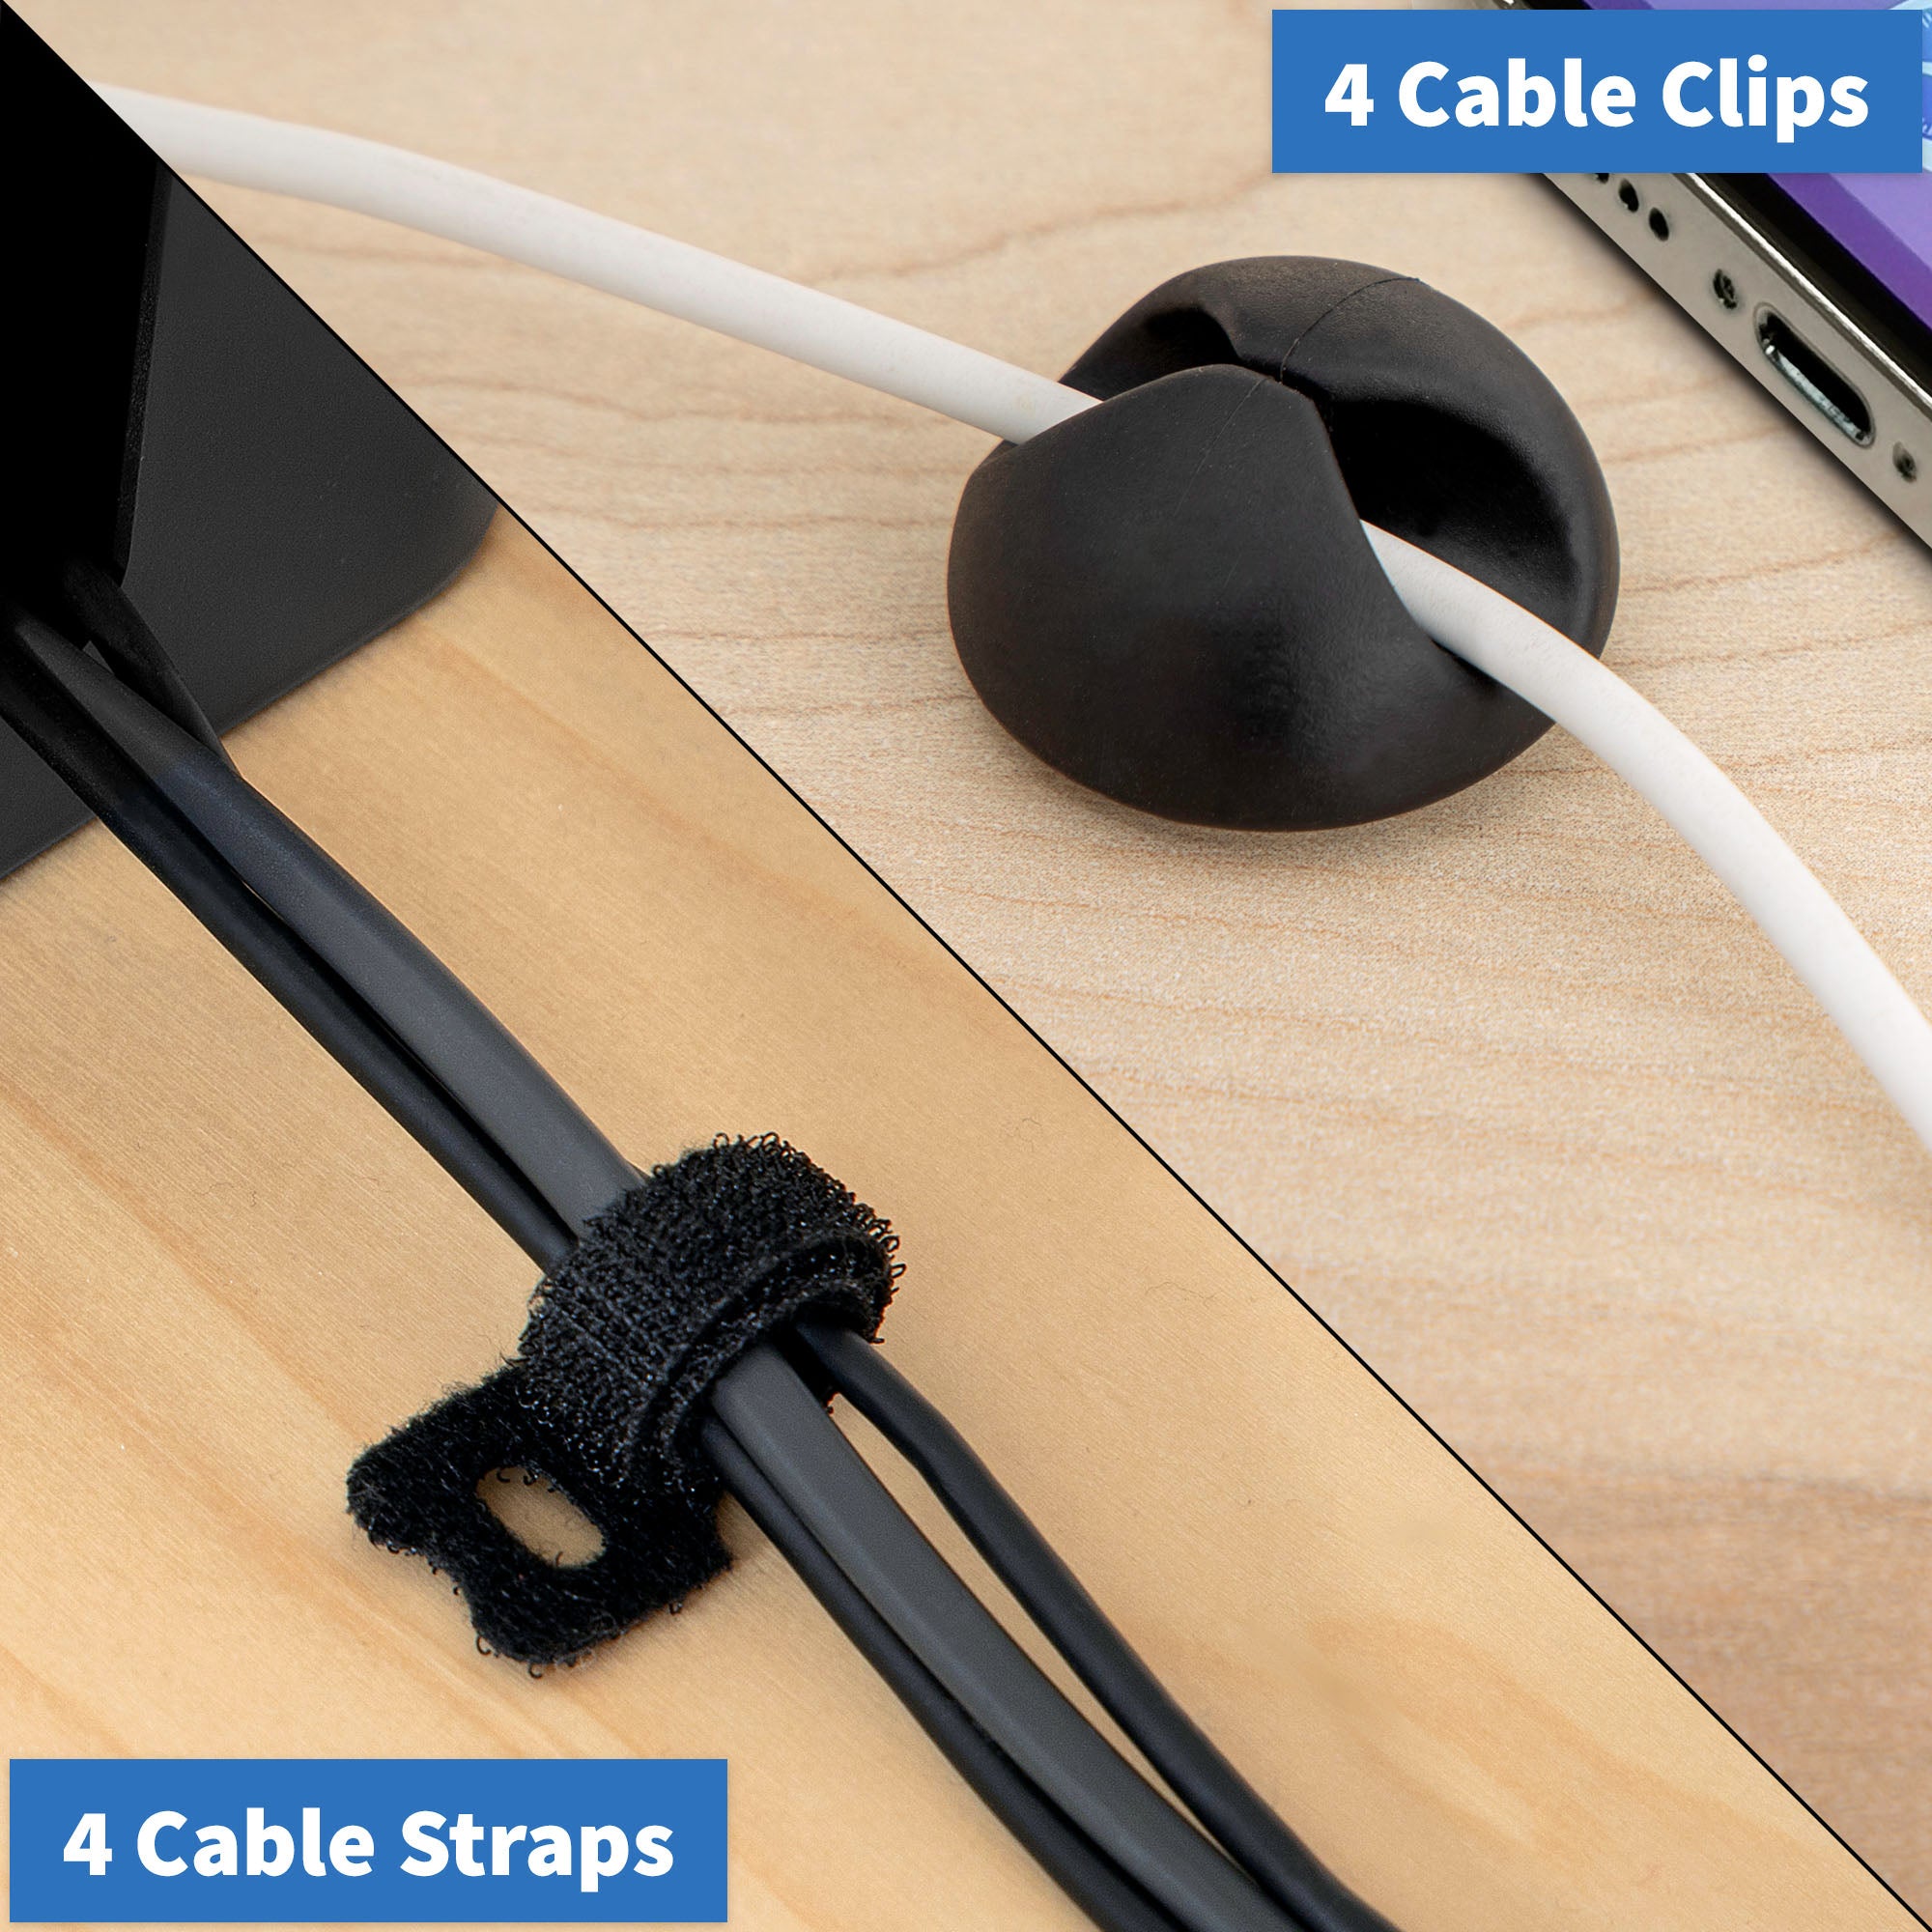 SimpleCord Under Desk Cable Organizer Cord Cover - Channel to Hide Power Strips, Wires, Power Supplies, Surge Protectors at Home or Office